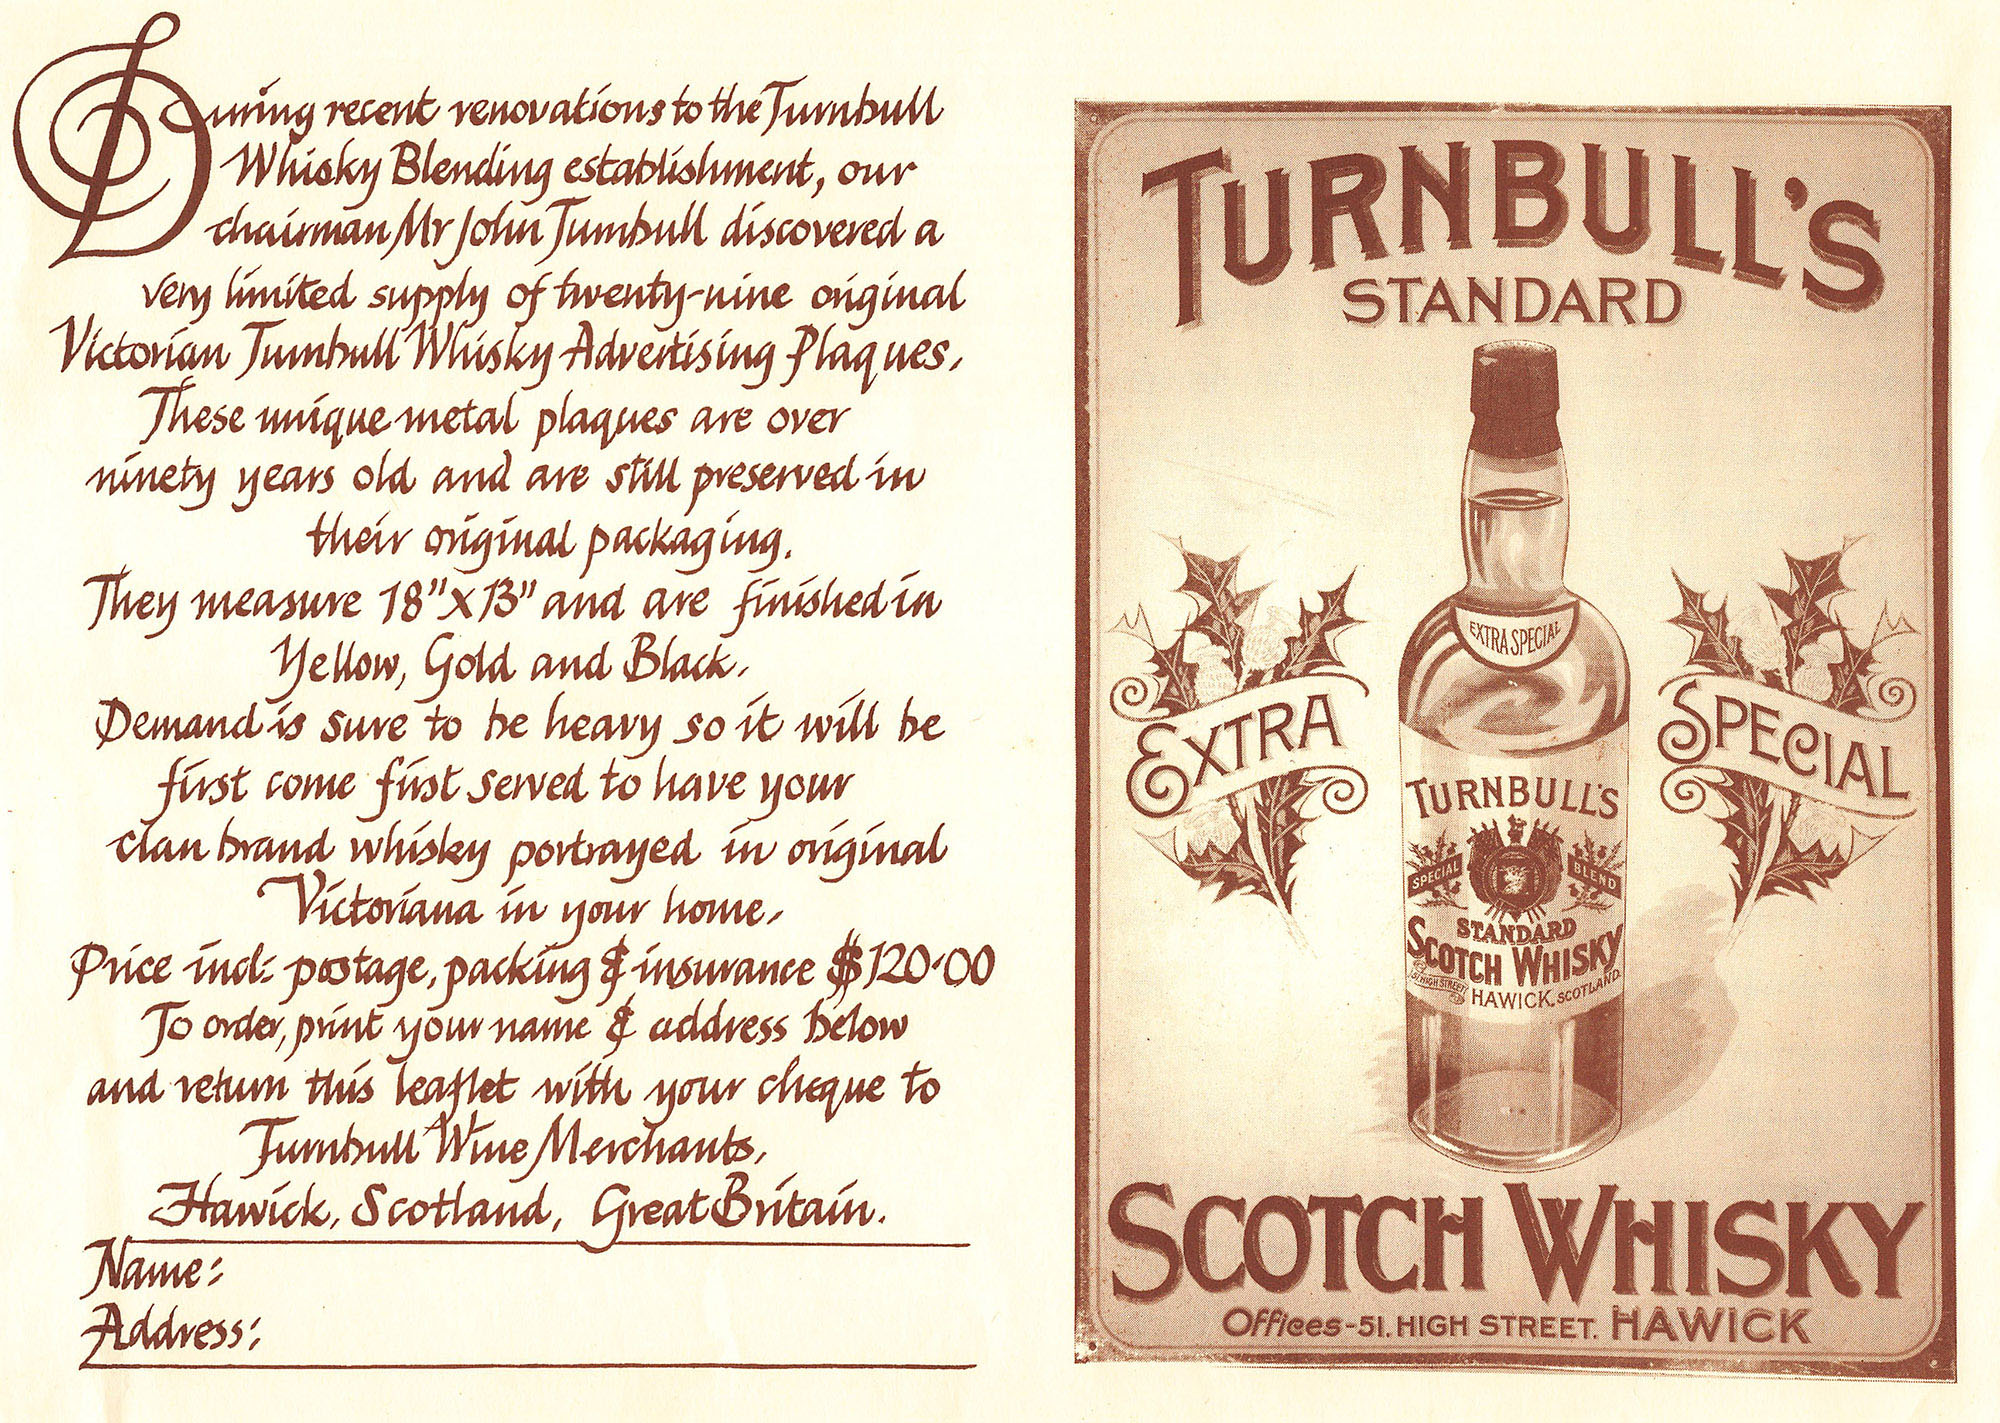 Turnbull Scotch Whisky Advertising Plaque